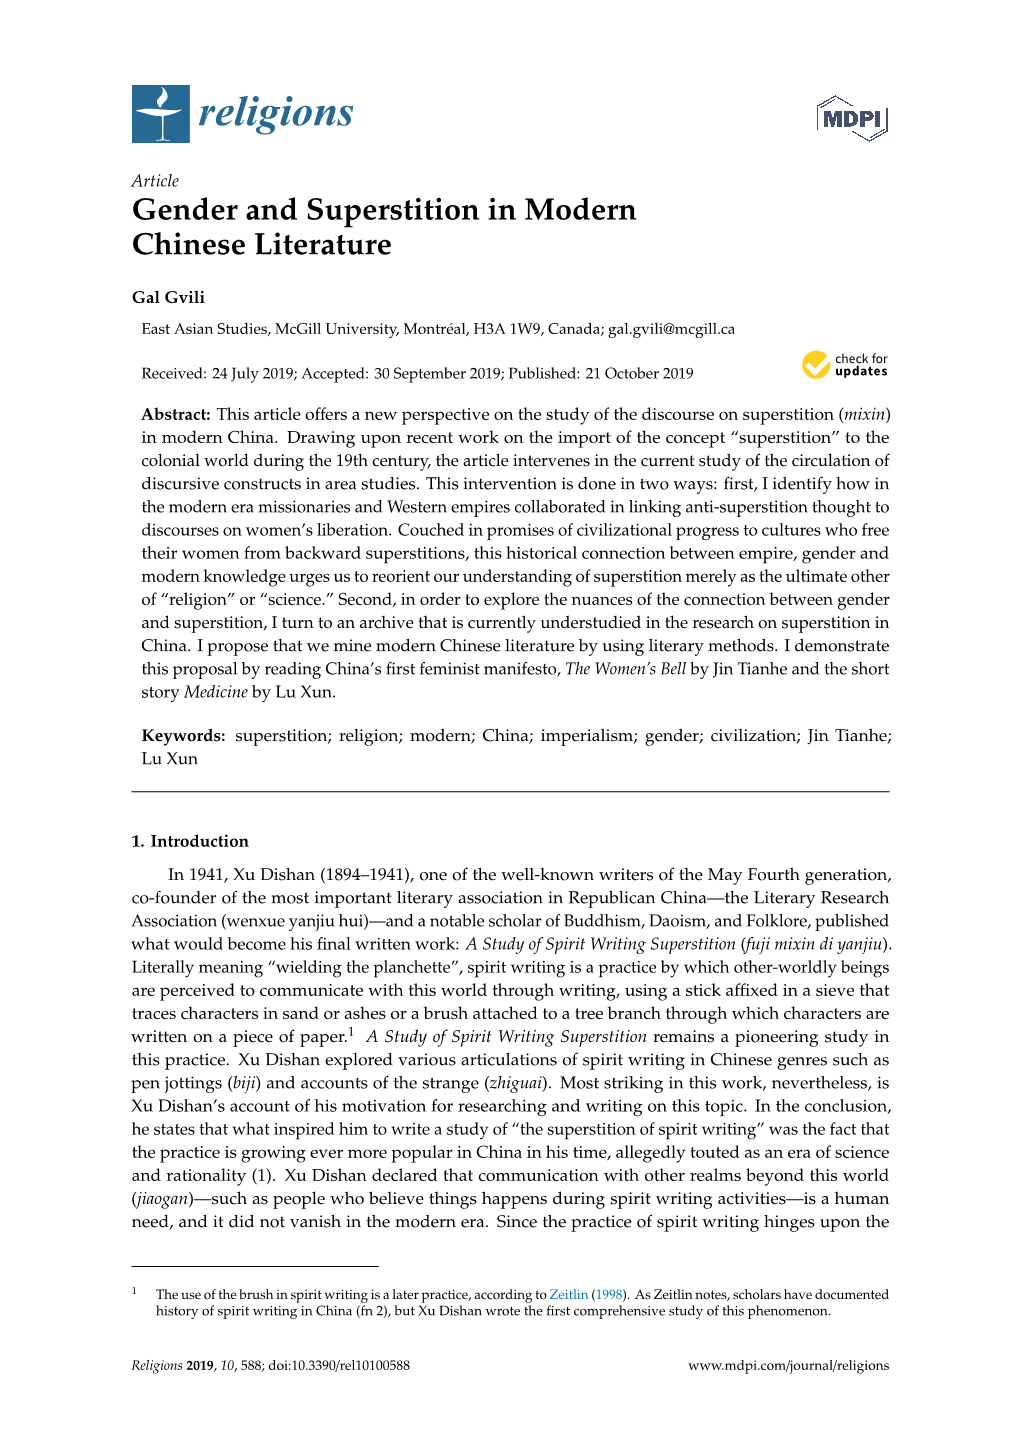 Gender and Superstition in Modern Chinese Literature